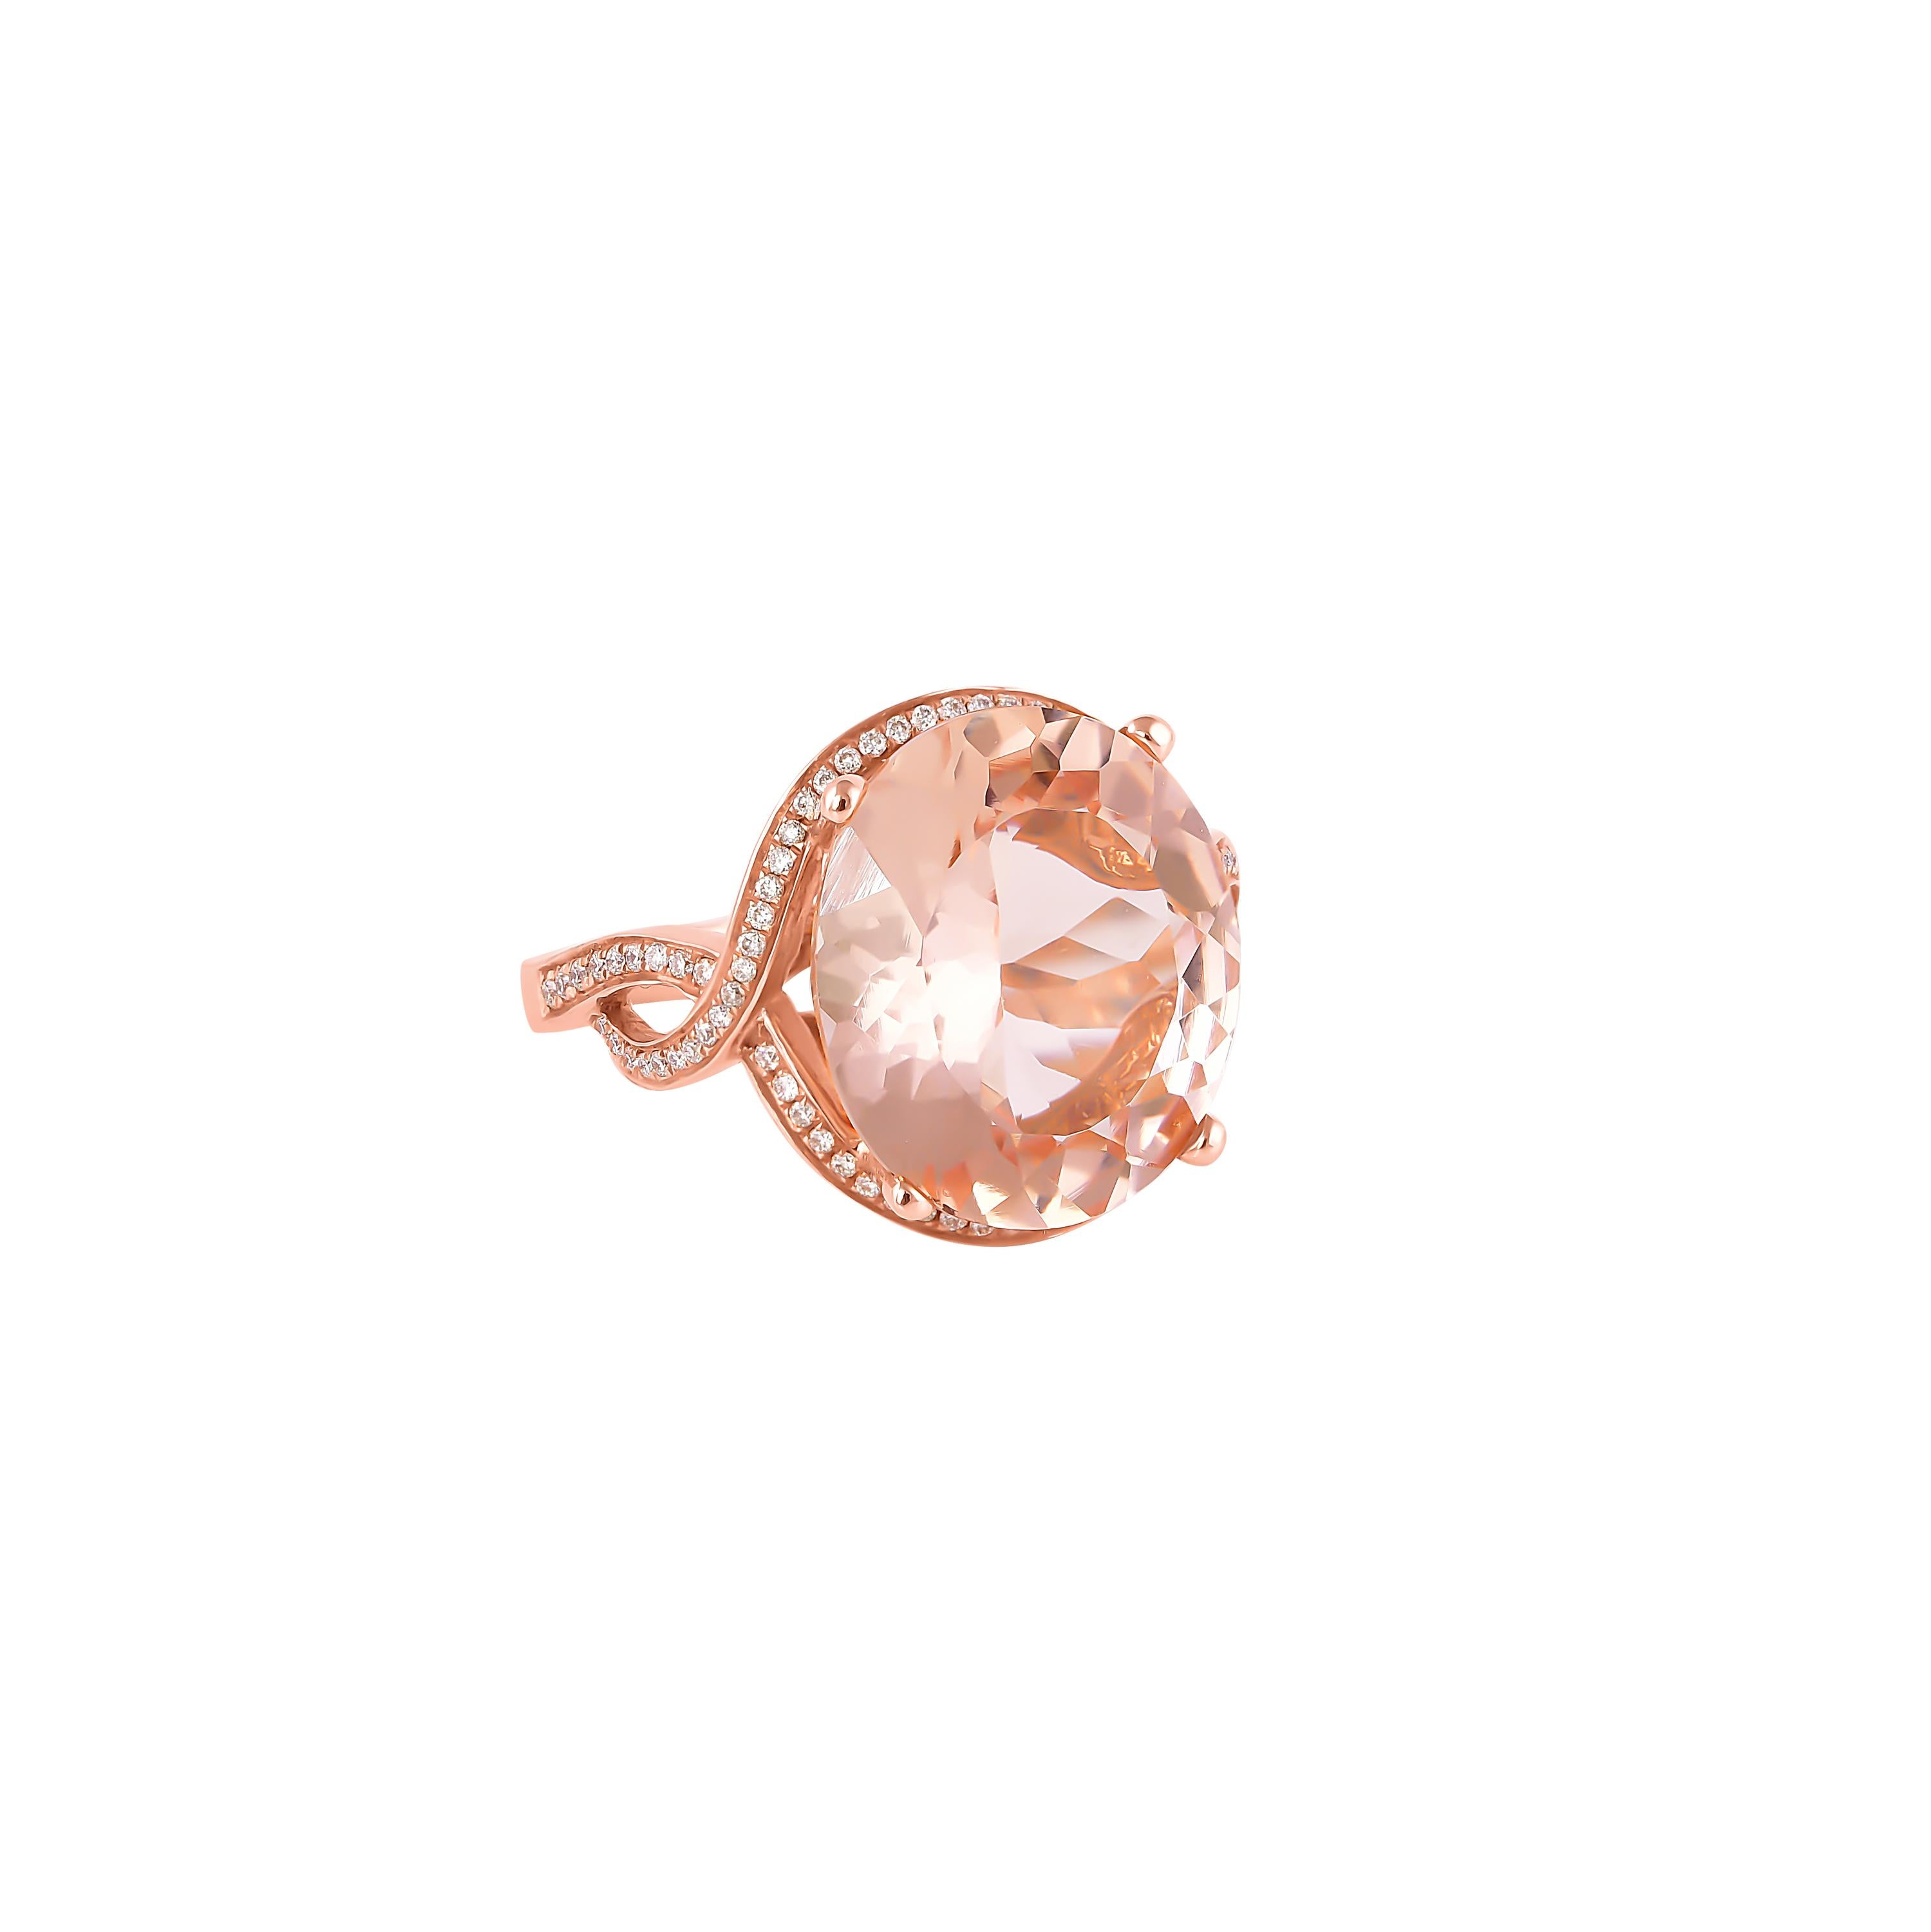 This collection features an array of magnificent morganites! Accented with Diamonds these rings are made in rose gold and present a classic yet elegant look. 

Classic morganite ring in 18K Rose gold with Diamond. 

Morganite: 6.11 carat, 14X12mm